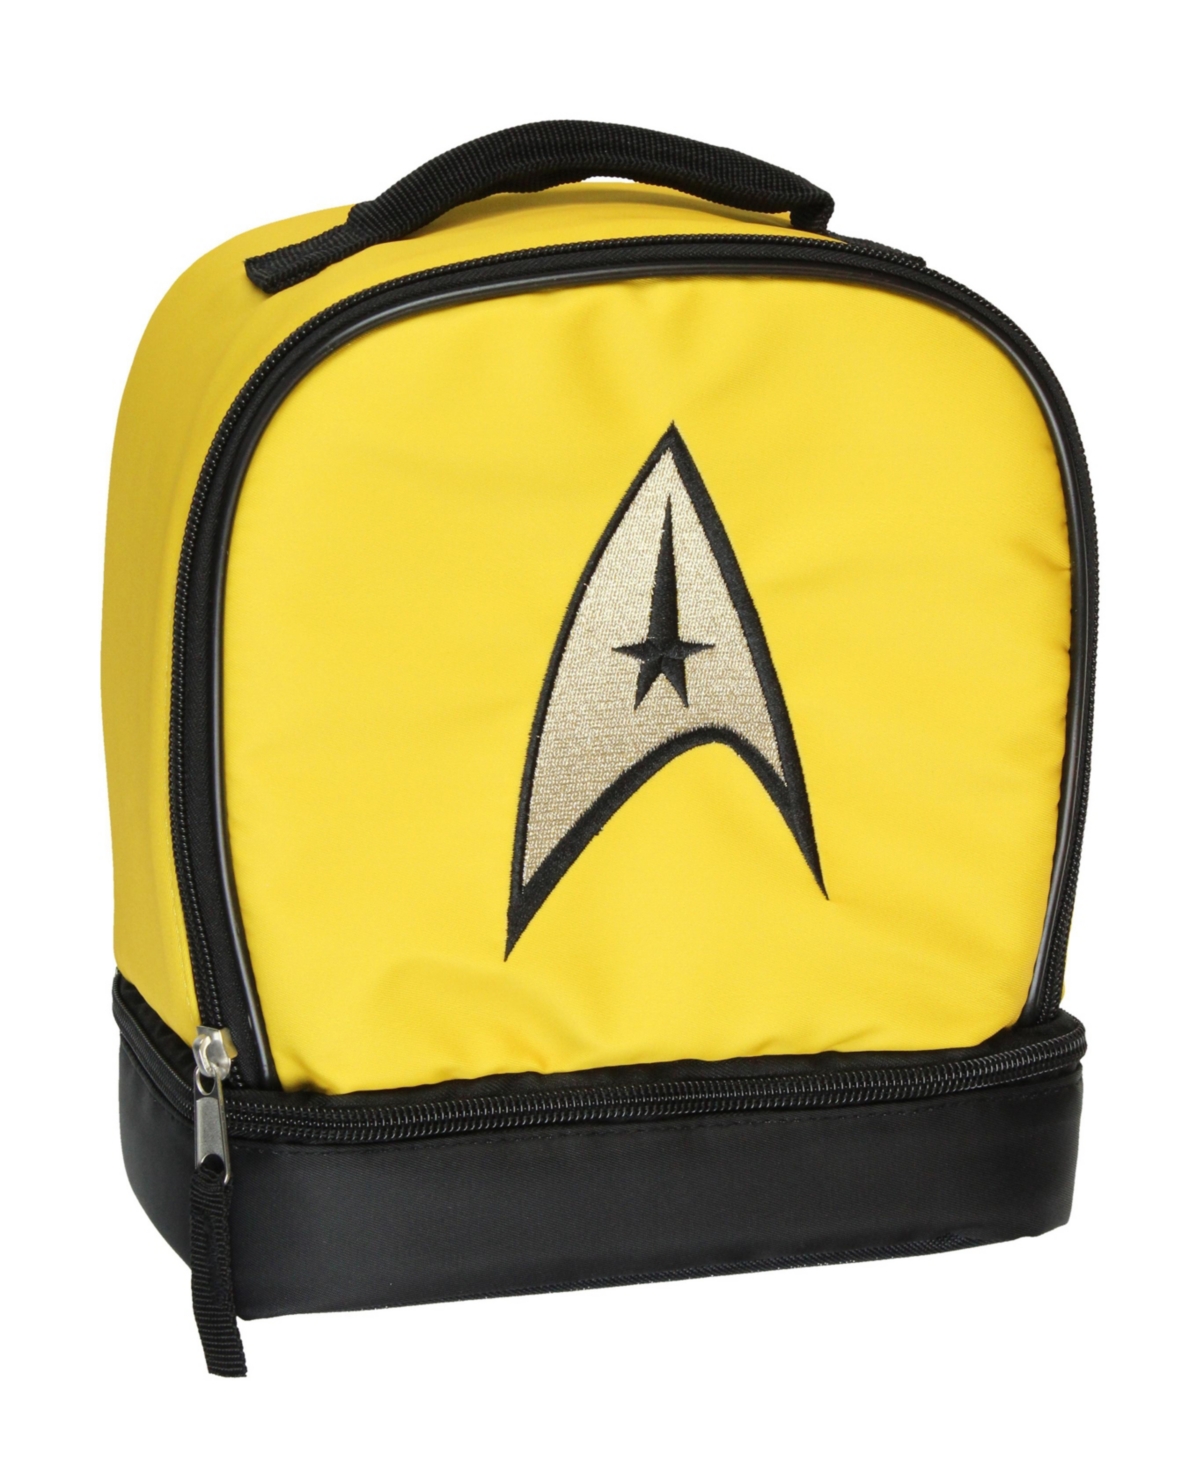 The Original Series Captain Kirk Embroidered Command Logo Dual Compartment Insulated Lunch Box Bag Tote - Yellow